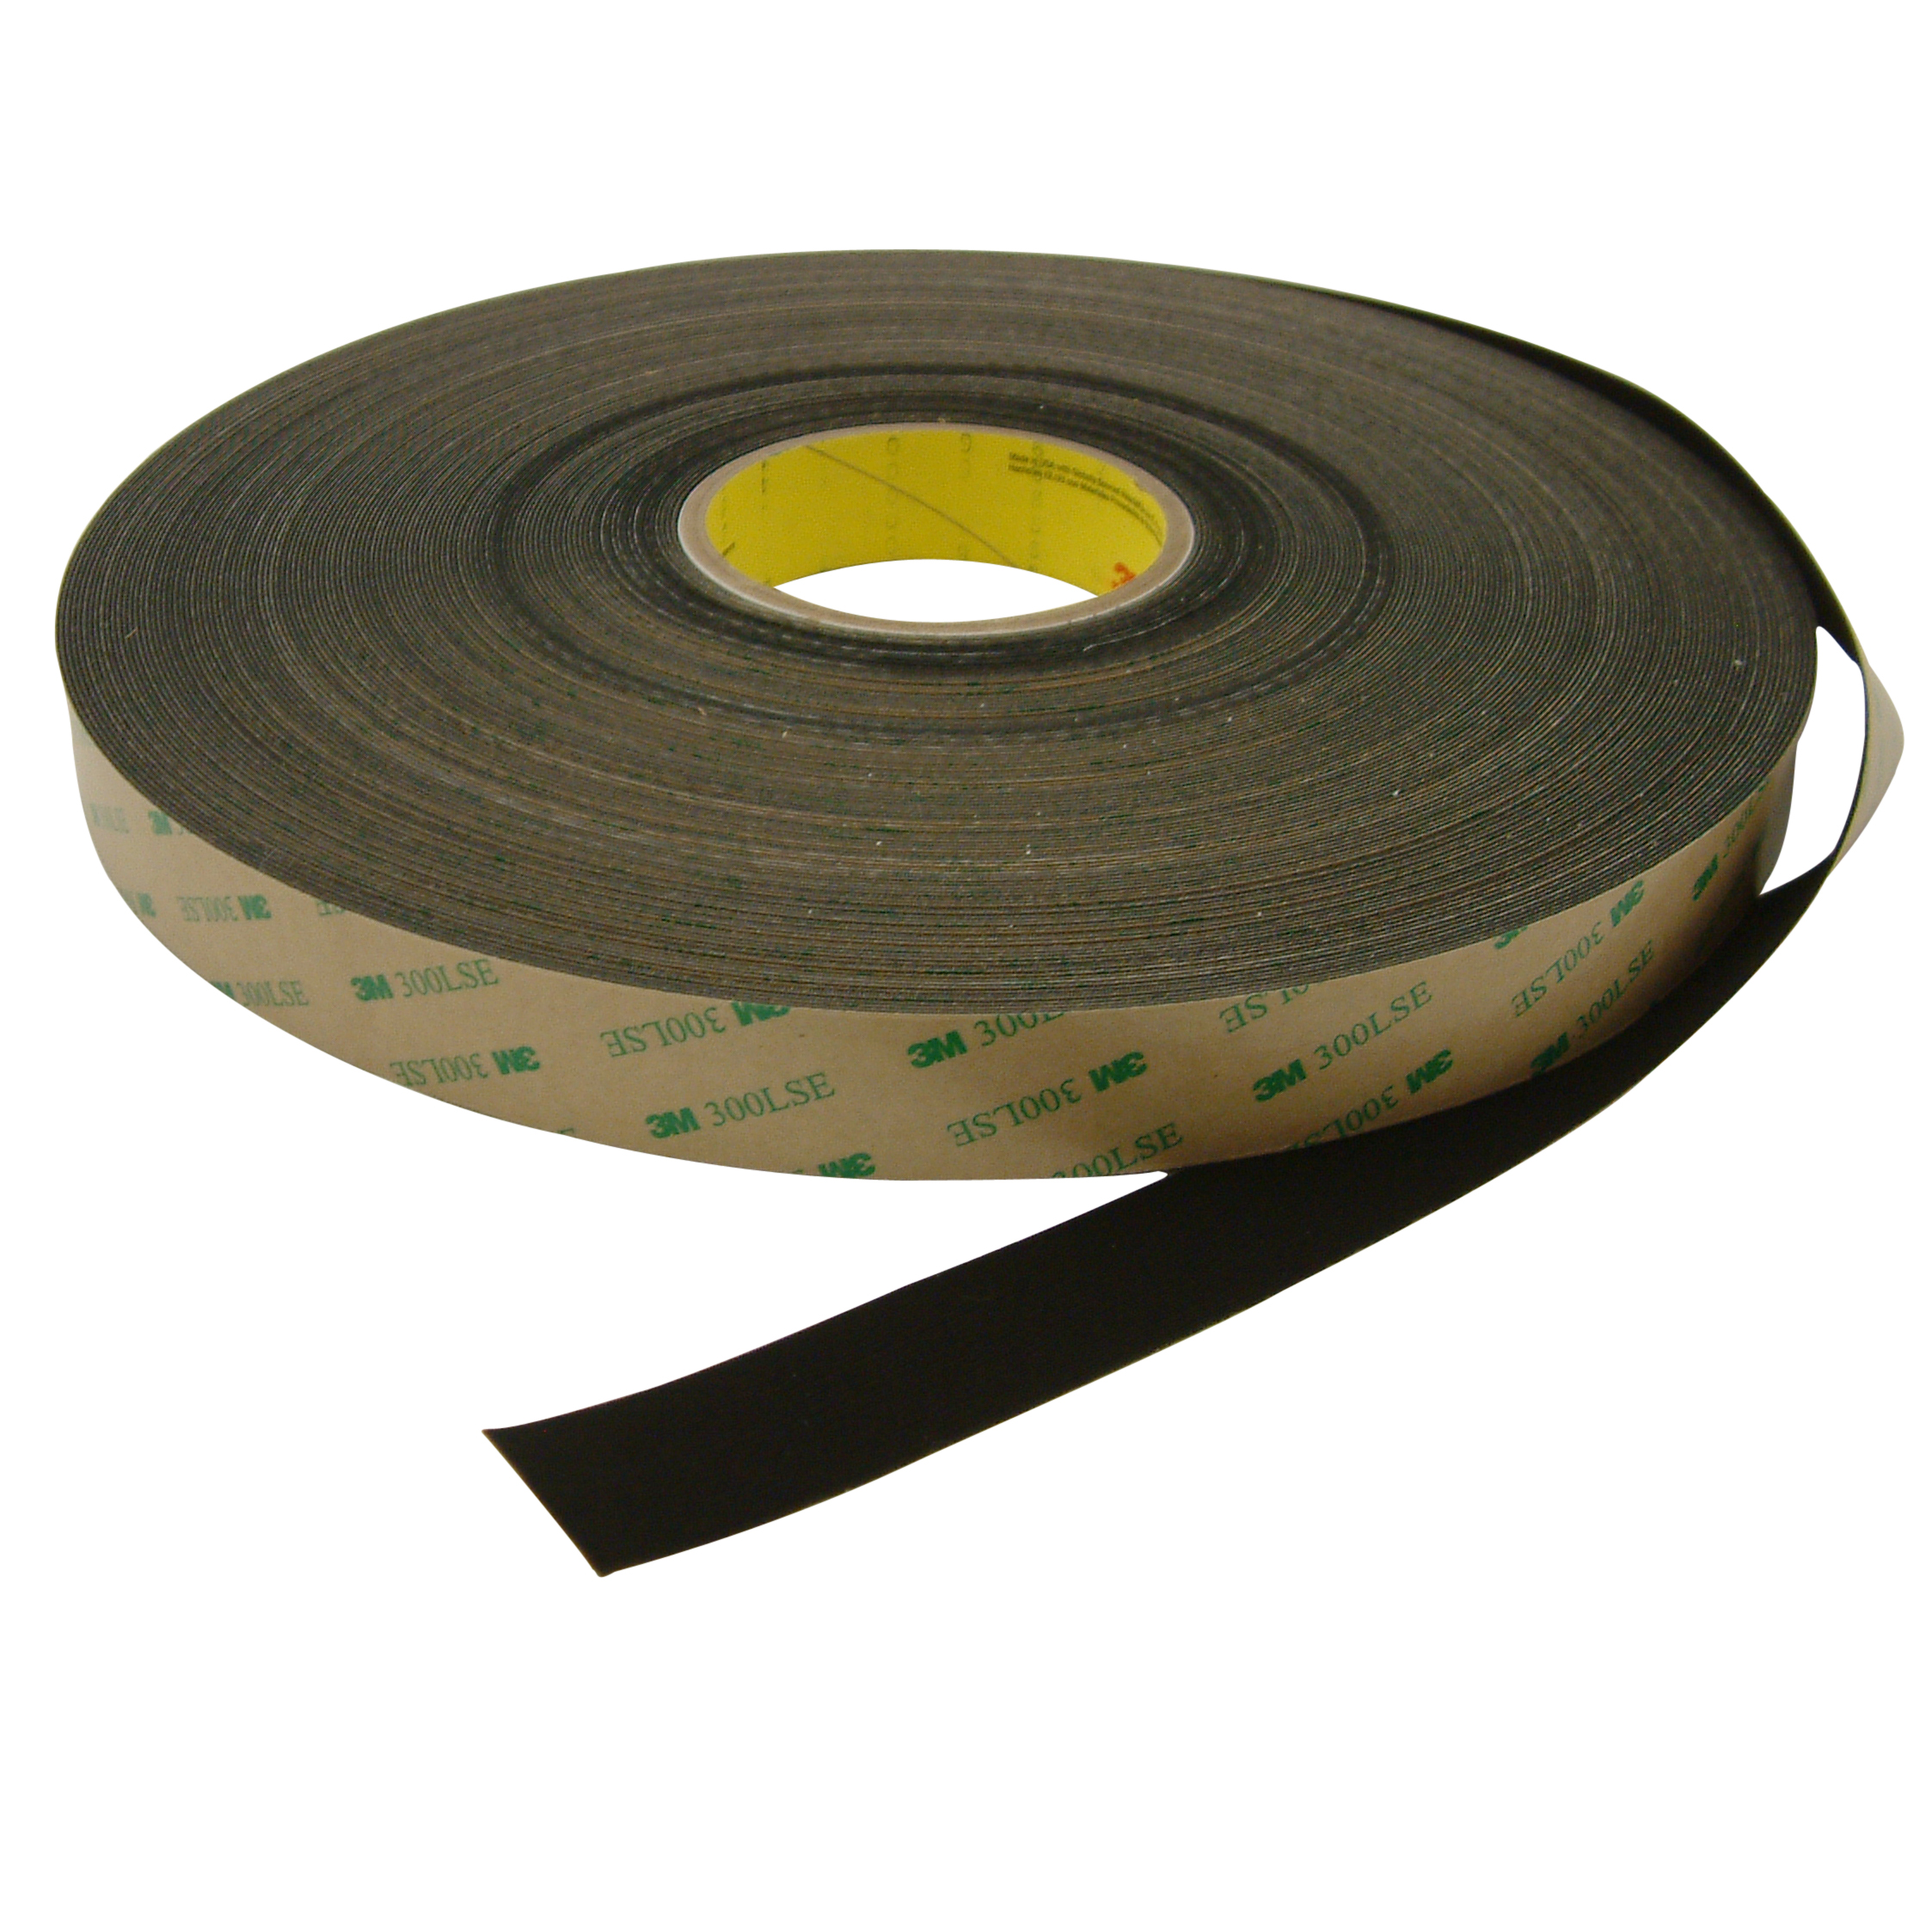 Details about   3M 1351-1 TAPE 1/2 IN X 72 8313-131402 